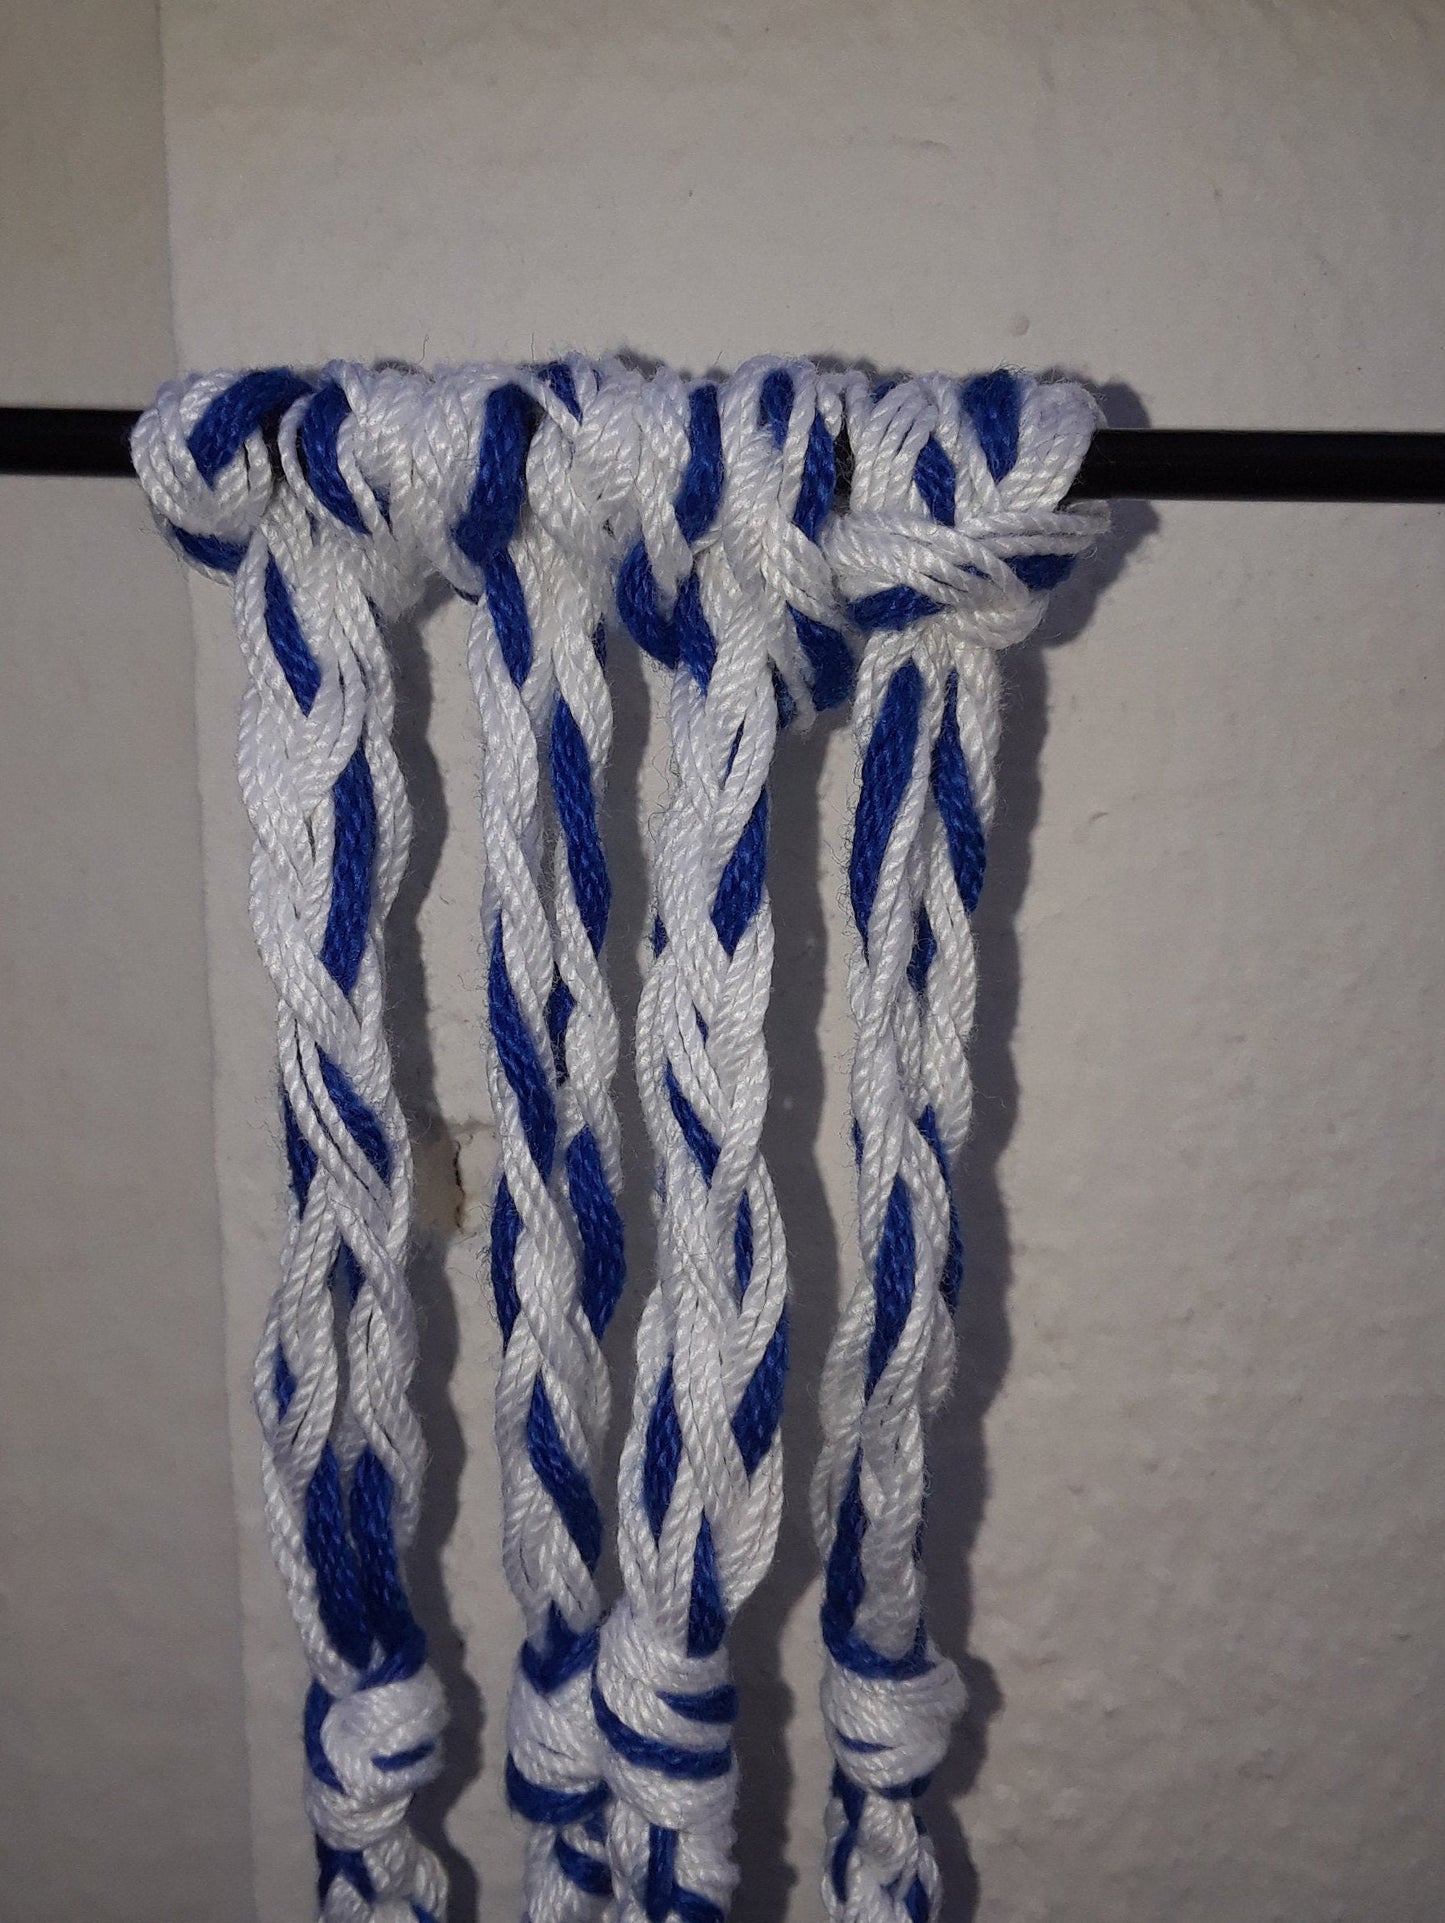 TZITZIT-TRADITIONAL Fringes/Tassels With Blue Messiah Techelet